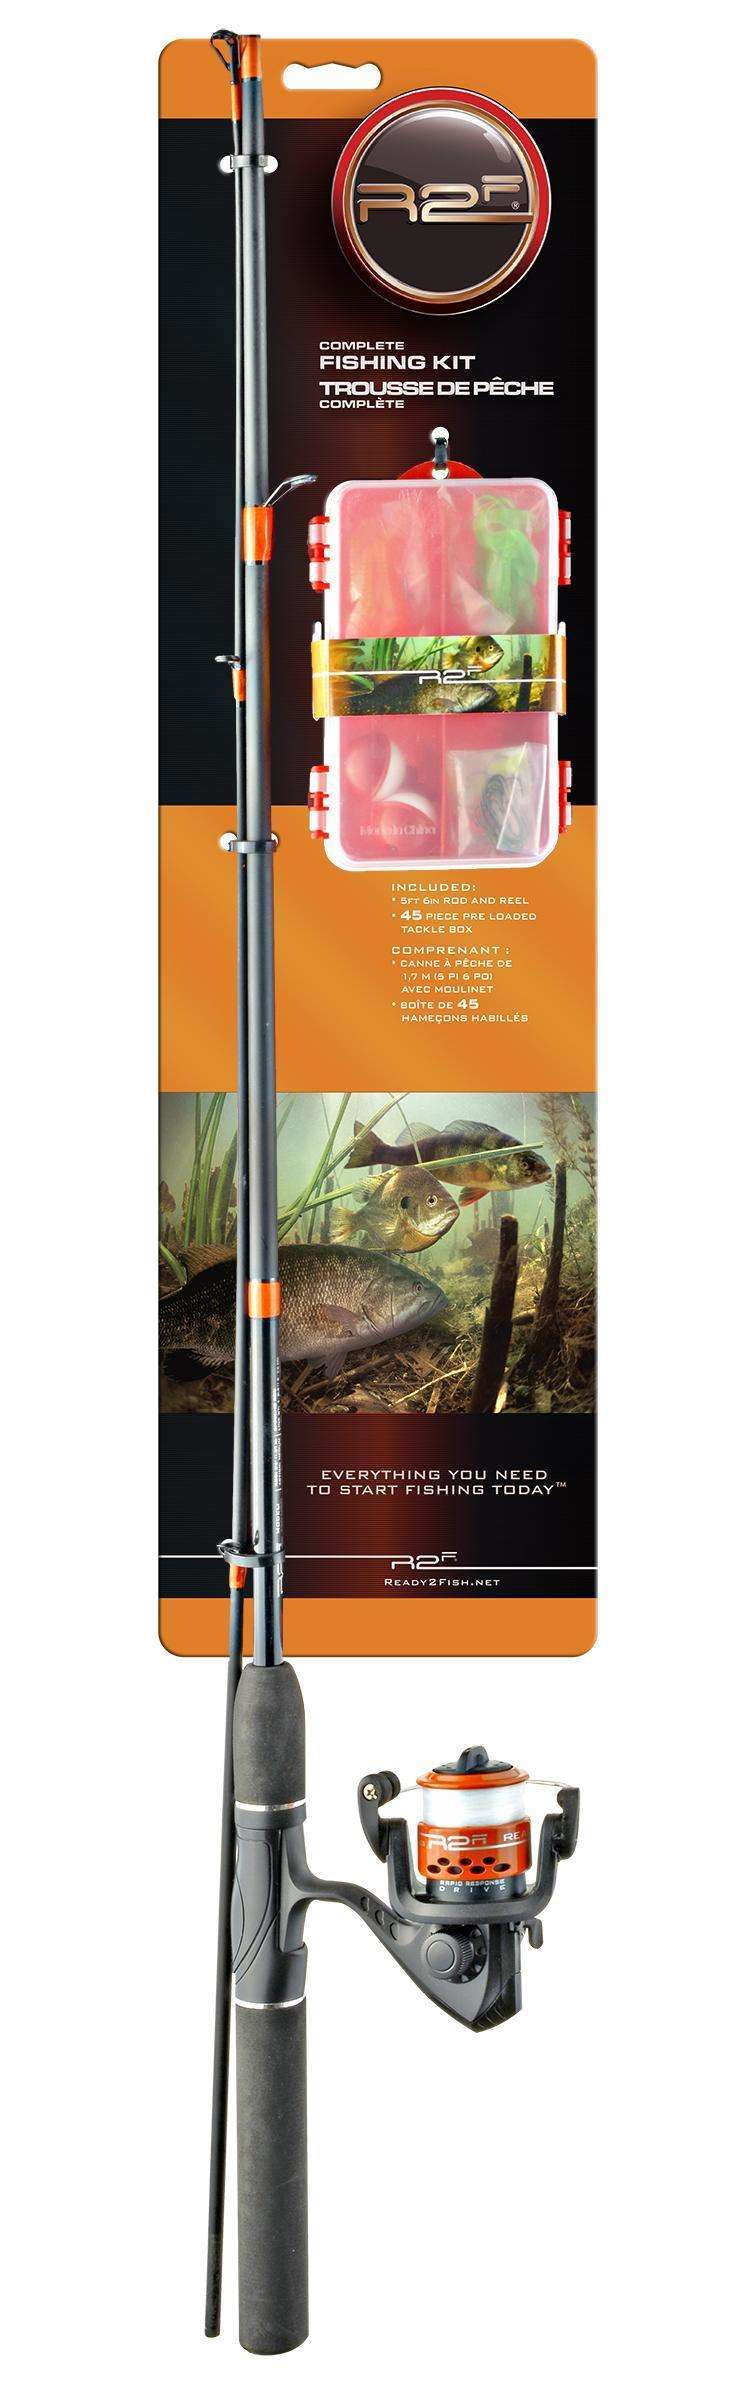 Ready 2 Fish Complete Fishing Kit - 45 Piece Tackle Kit w/Reusable Box